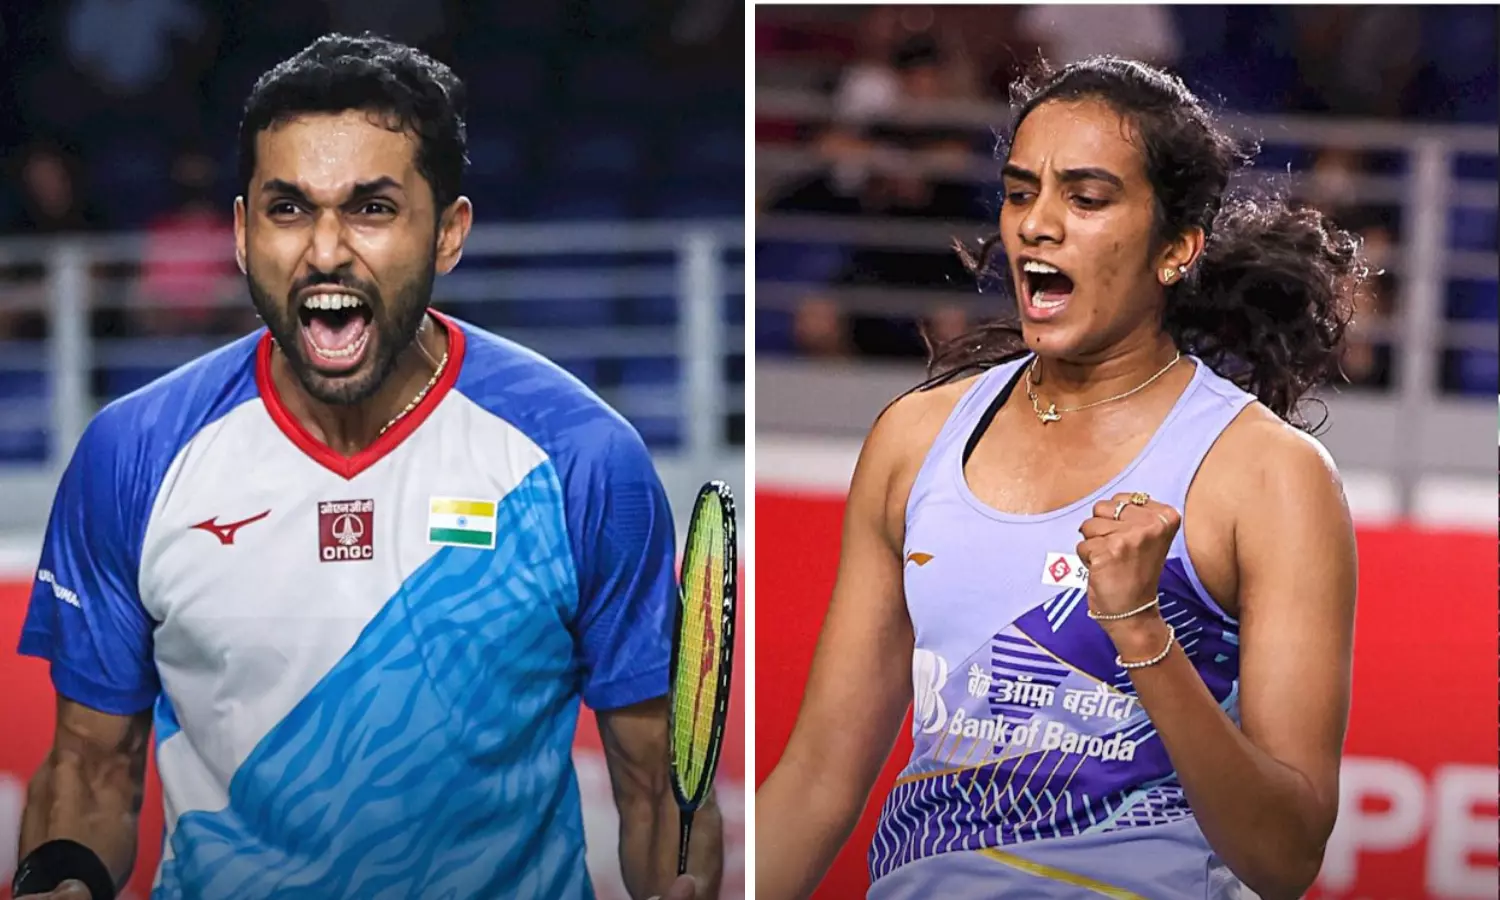 Indonesia Open Satwik/Chirag, Prannoy, PV Sindhu moves to round of 16- HIGHLIGHTS